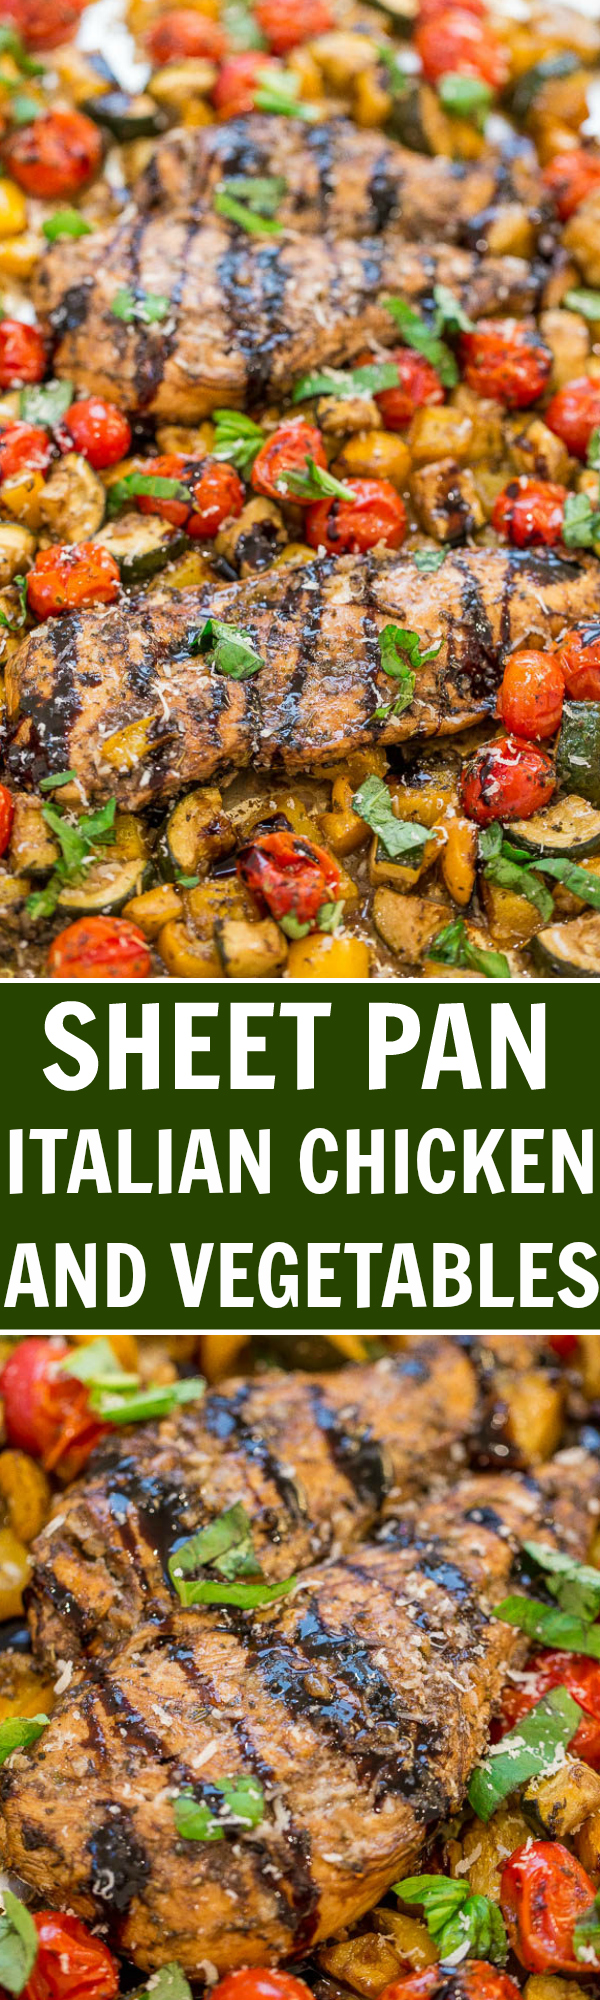 Sheet Pan Baked Italian Chicken and Vegetables — Fast, EASY, one pan recipe that's full of FLAVOR from balsamic, Italian seasoning, Parmesan cheese, and basil!! The chicken is so tender, juicy, and moist!!